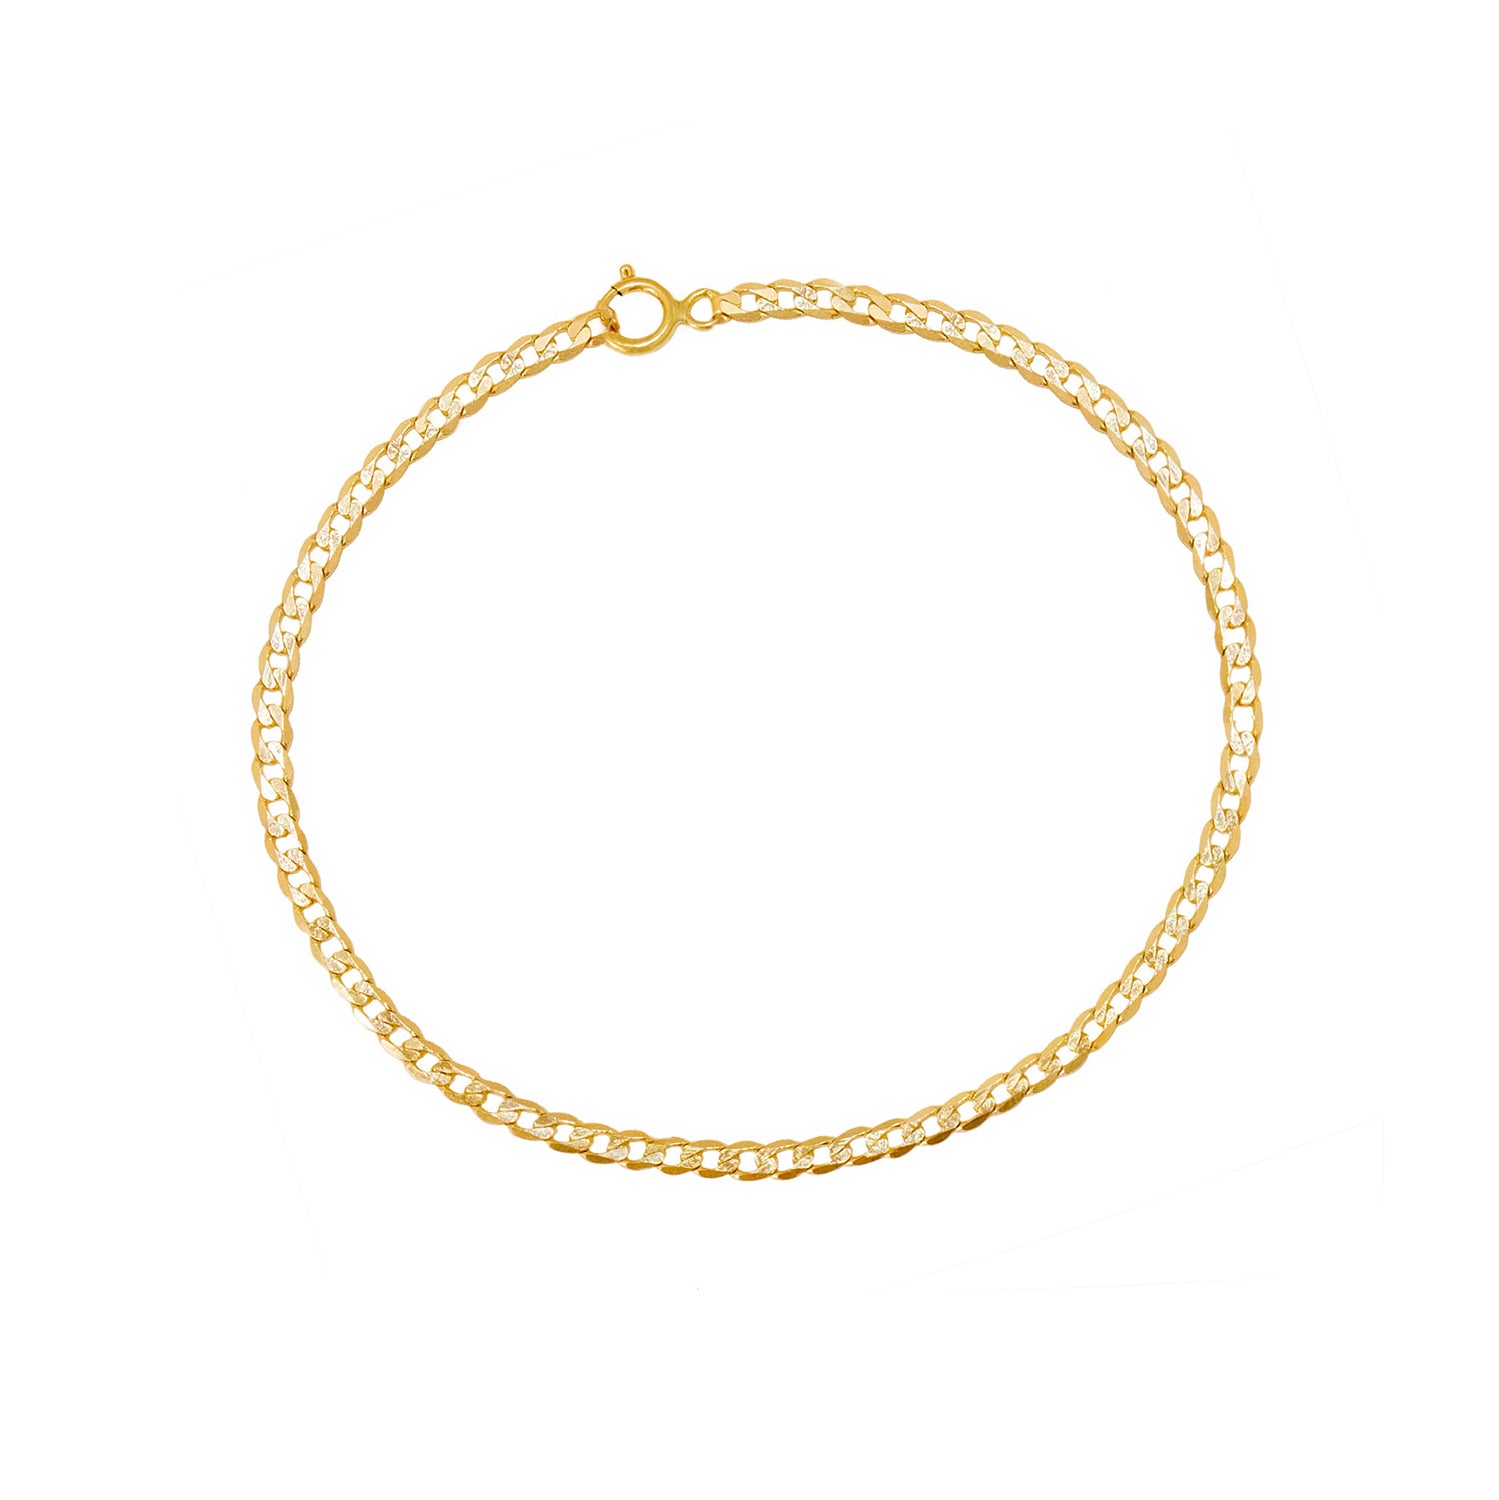 14K Dainty Cuban Link Chain Bracelet 14K Yellow Gold / 7.5 Inches by Baby Gold - Shop Custom Gold Jewelry